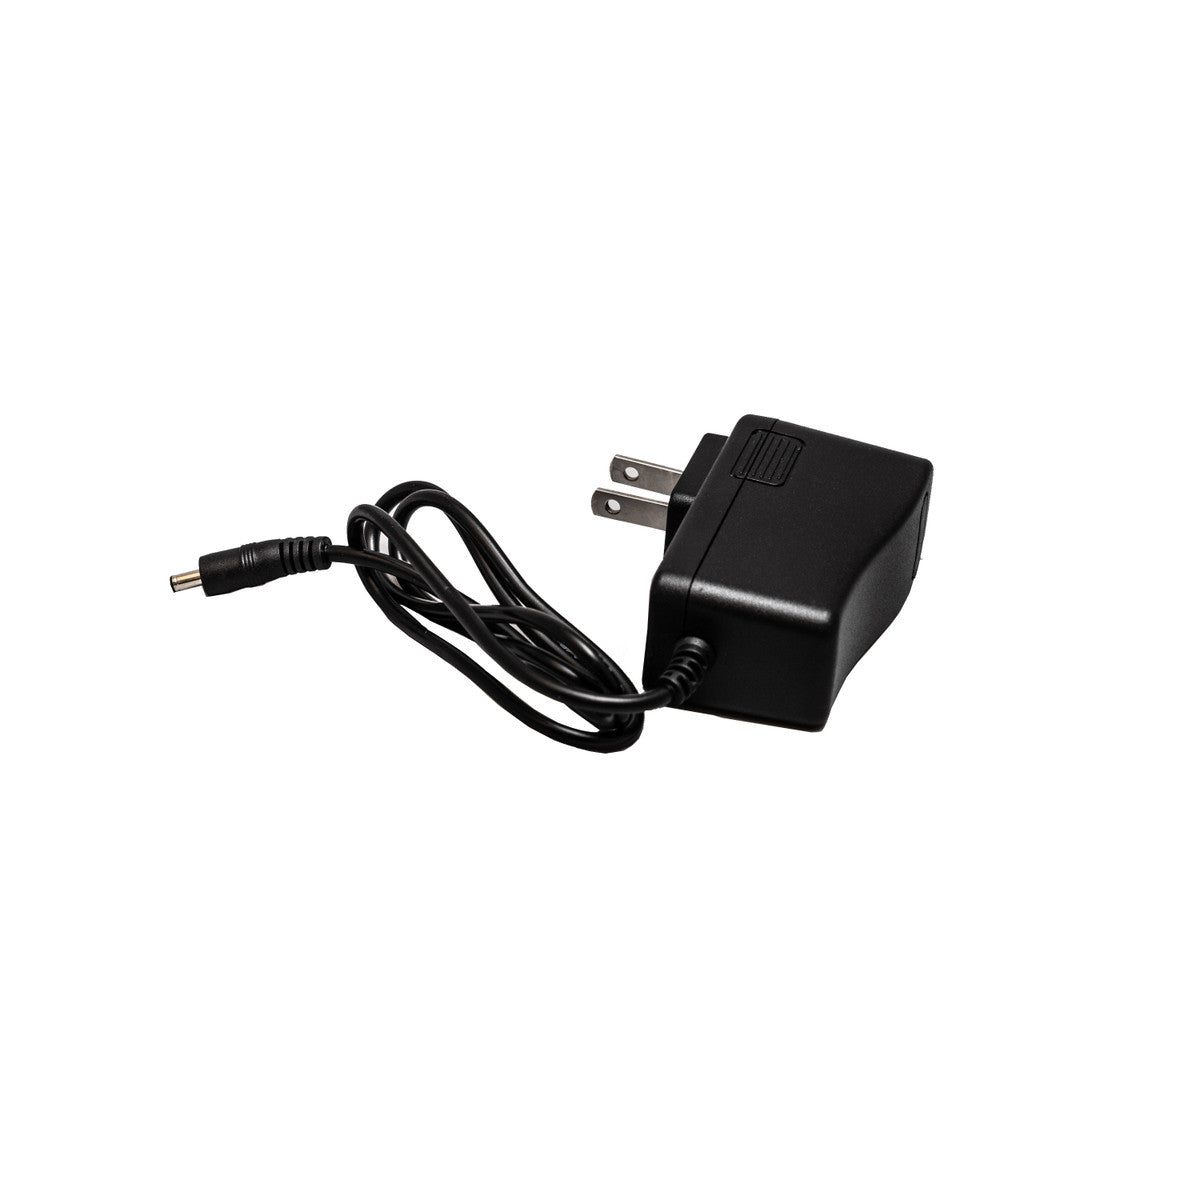 Chargeur mural 509 AC pour batterie Ignite